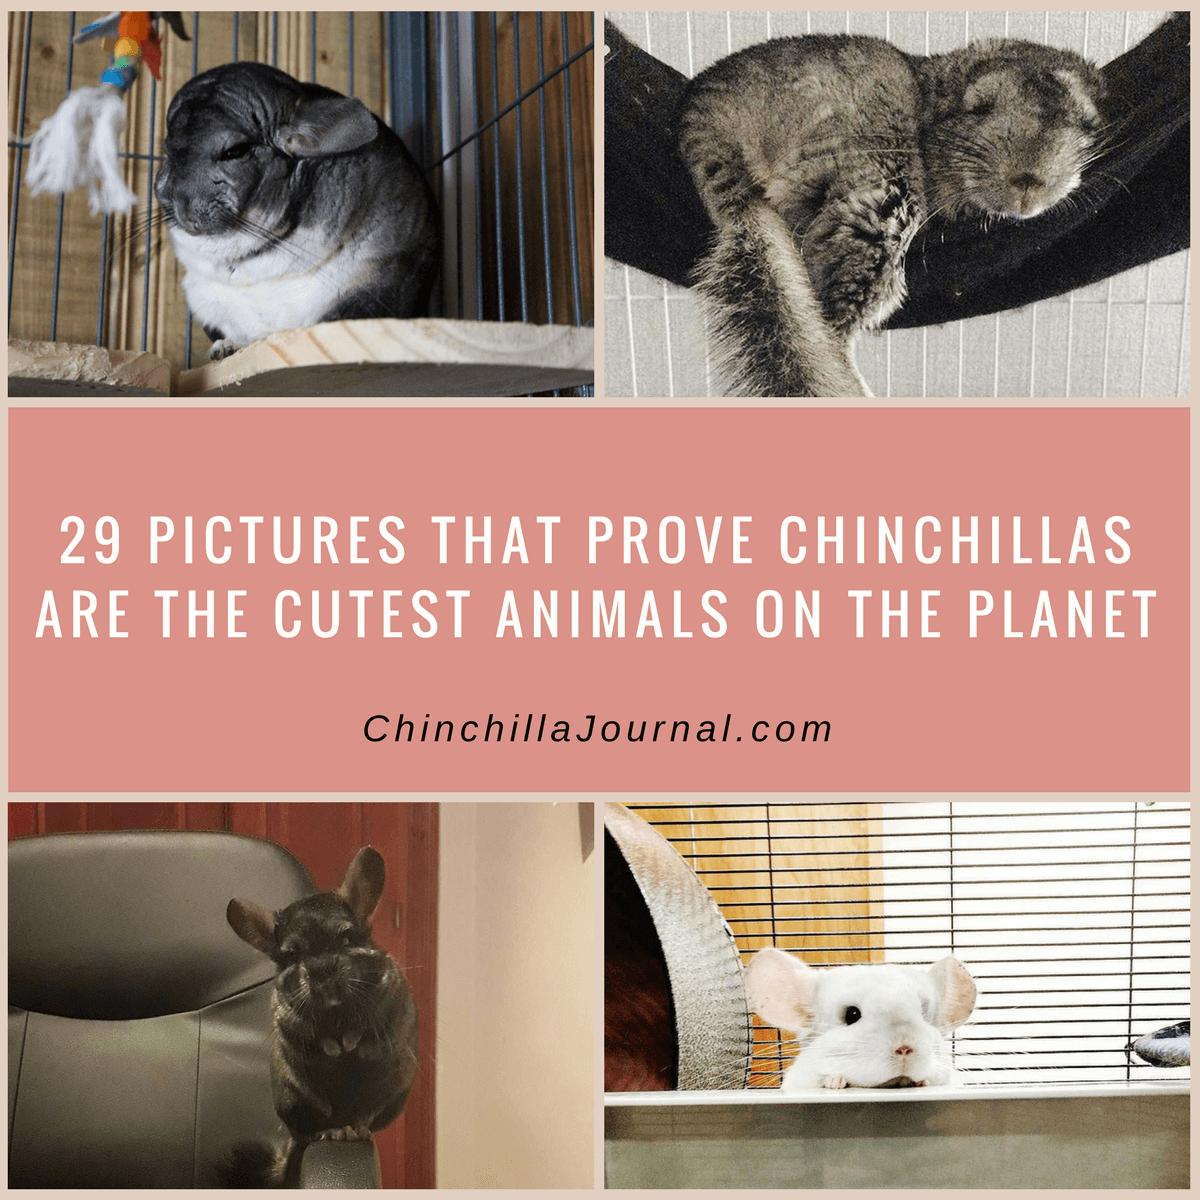 29 Pictures That Prove Chinchillas Are The Cutest Animals On The Planet